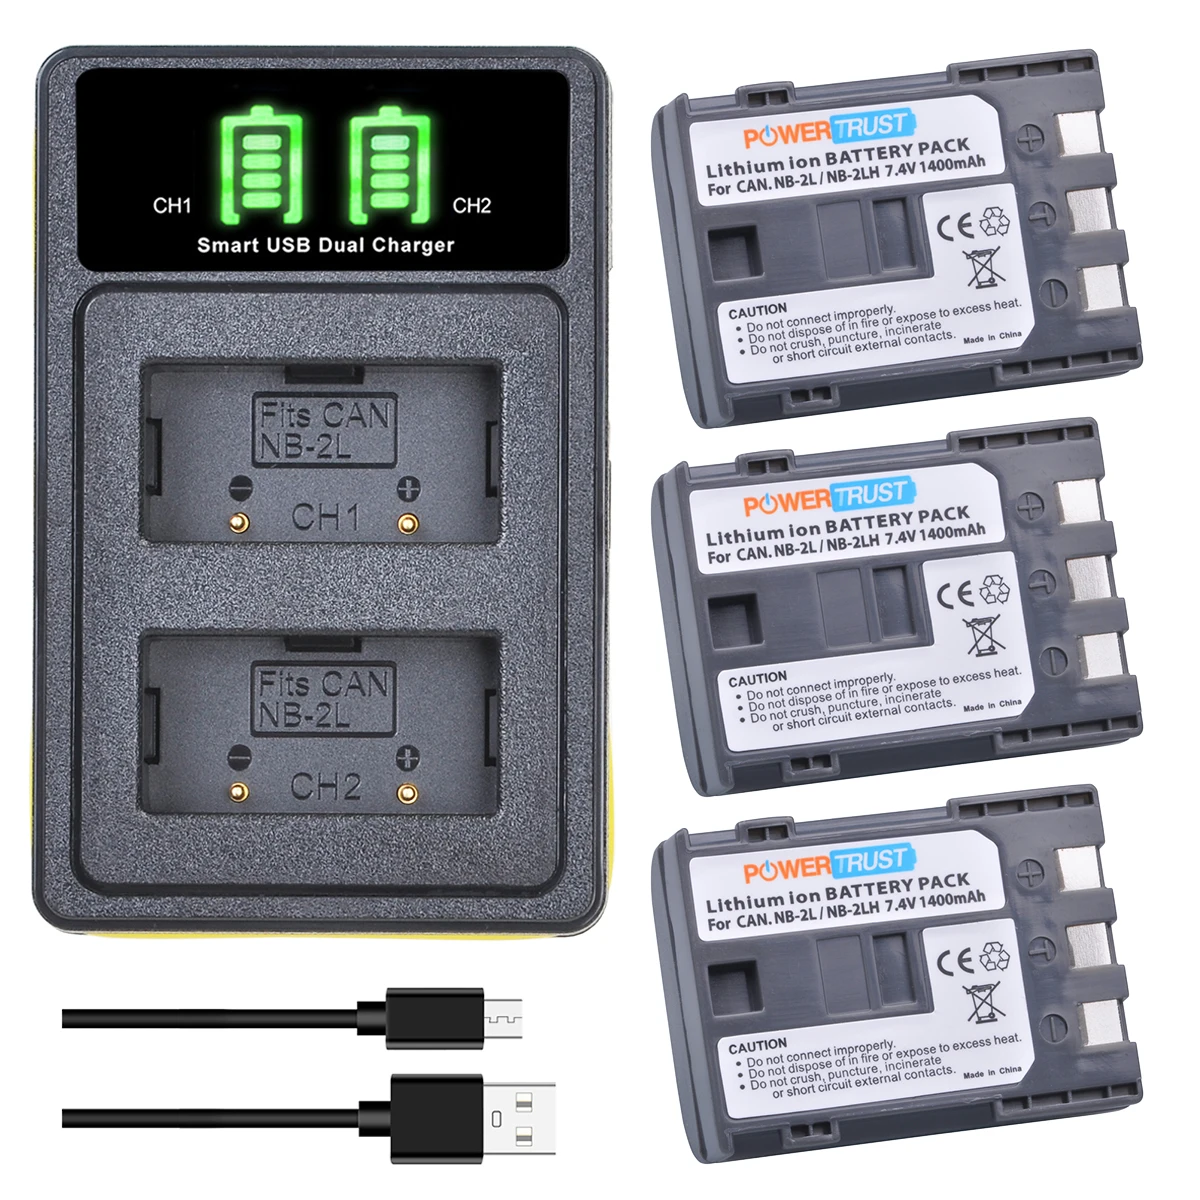 NB-2LH NB 2L 2LH NB-2L Battery and Charger for Canon EOS 350D 400D MD265 MV960 PowerShot G7 G9 S70 S80 ZR950 ZR960 HG10 HV40